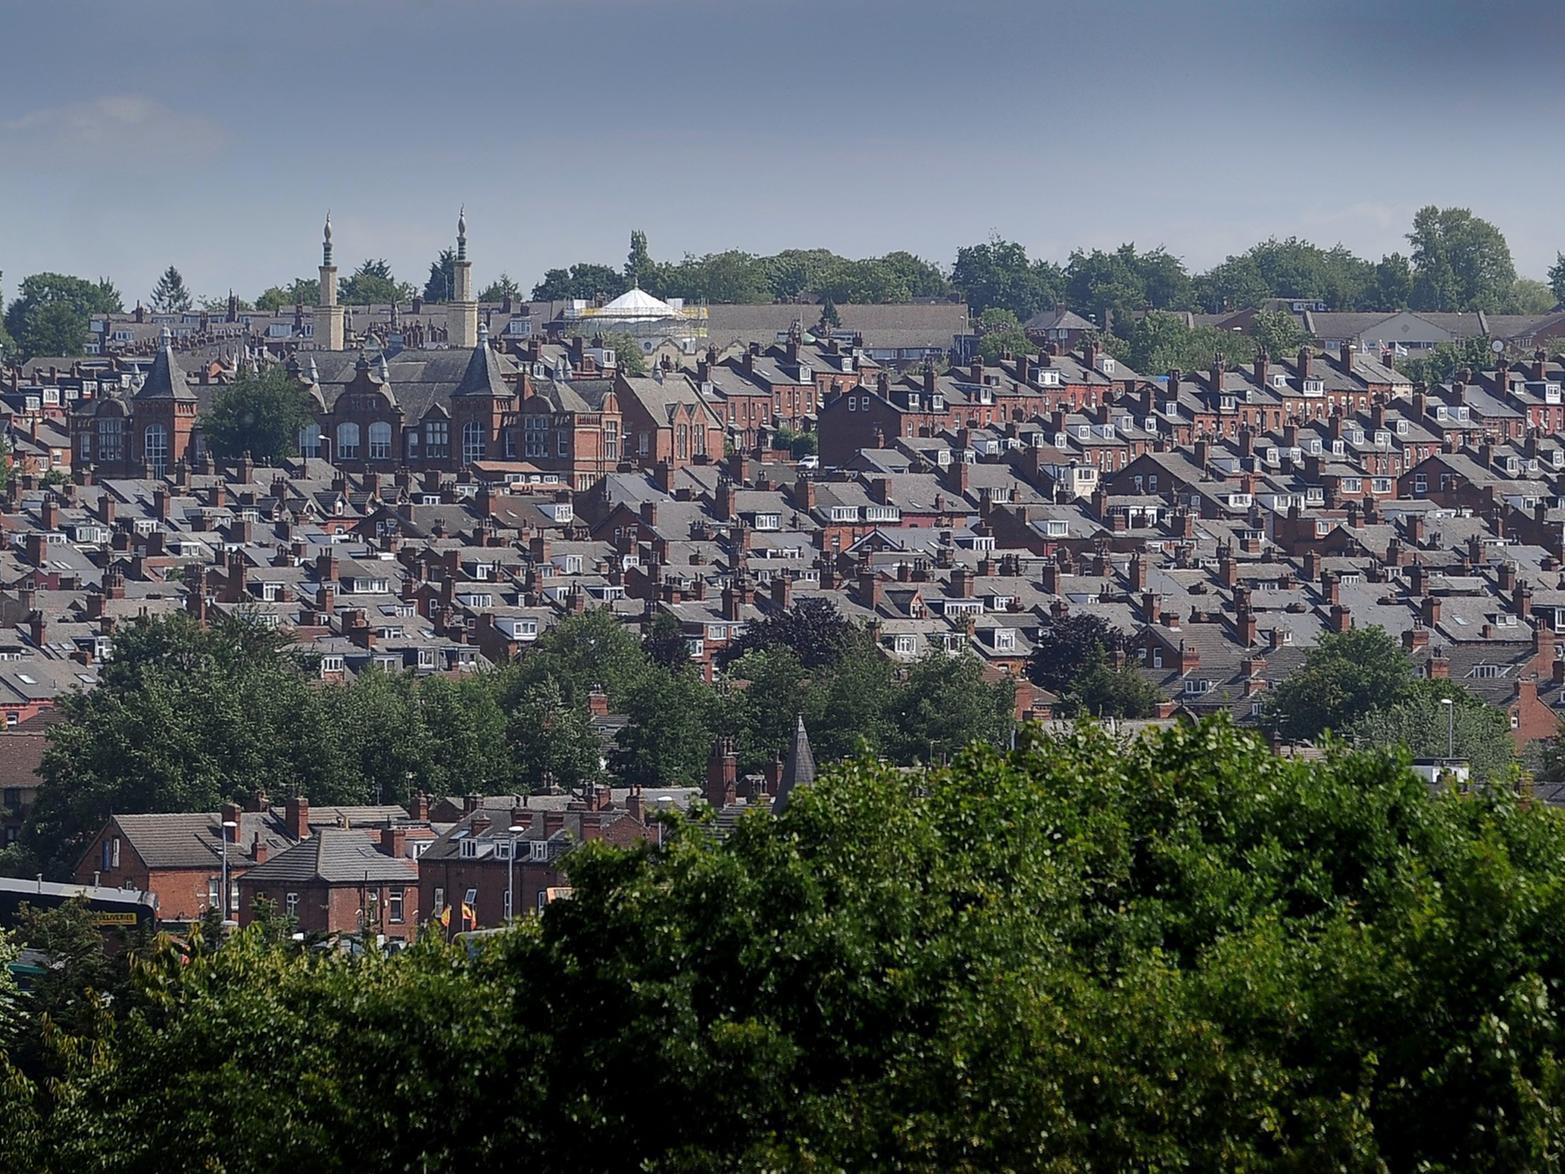 There were 142 reports of violence and sexual offences in Harehills and the surrounding area